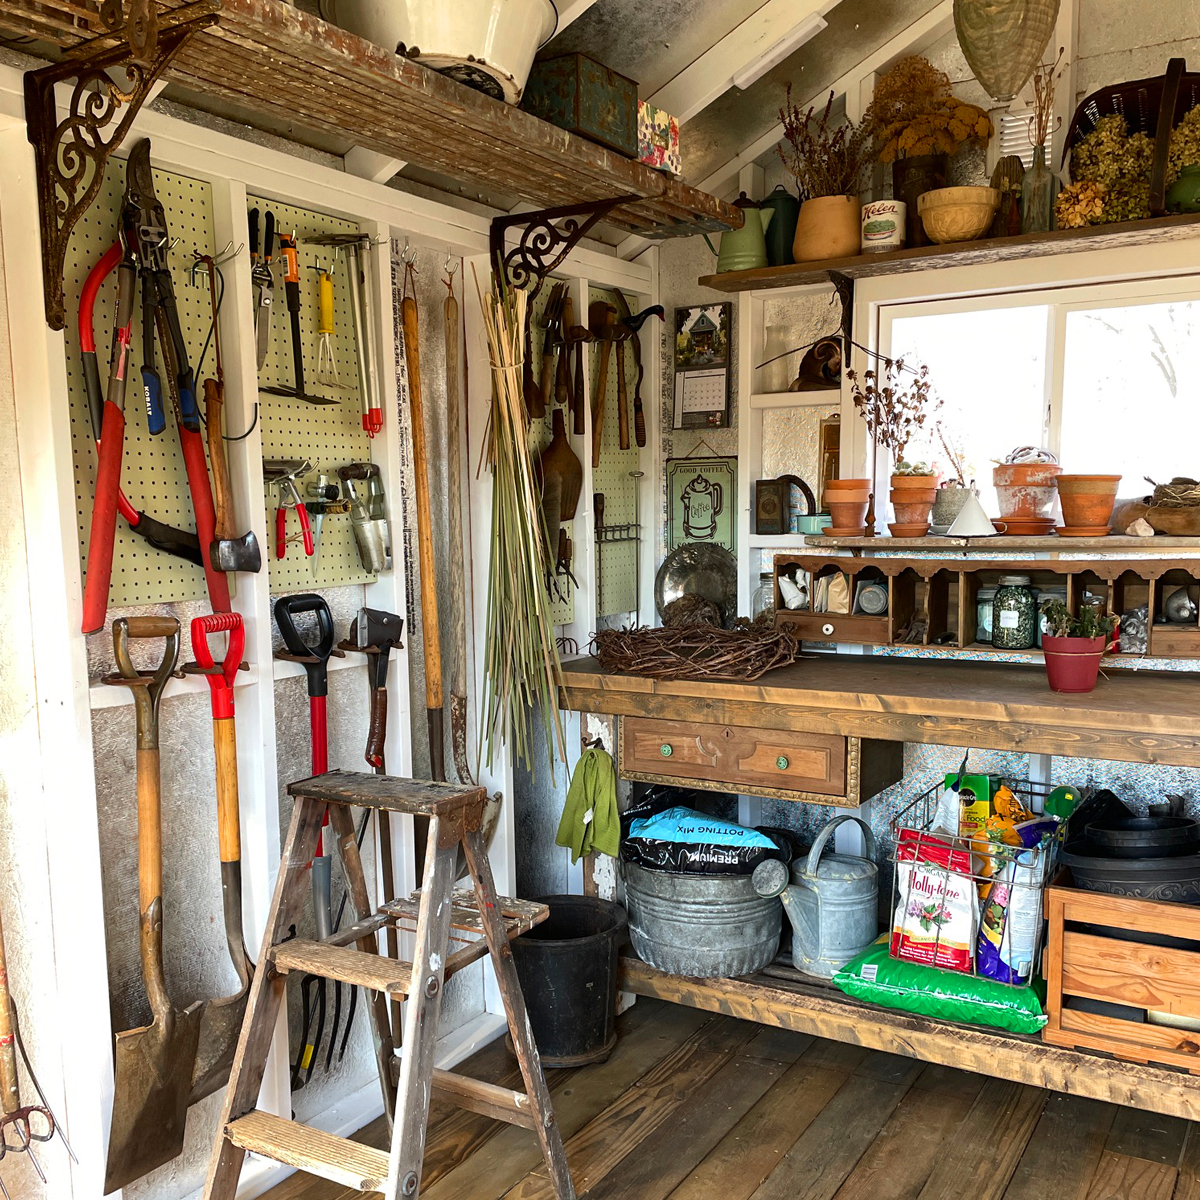 A closer look at the storage space inside the rustic garden shed.